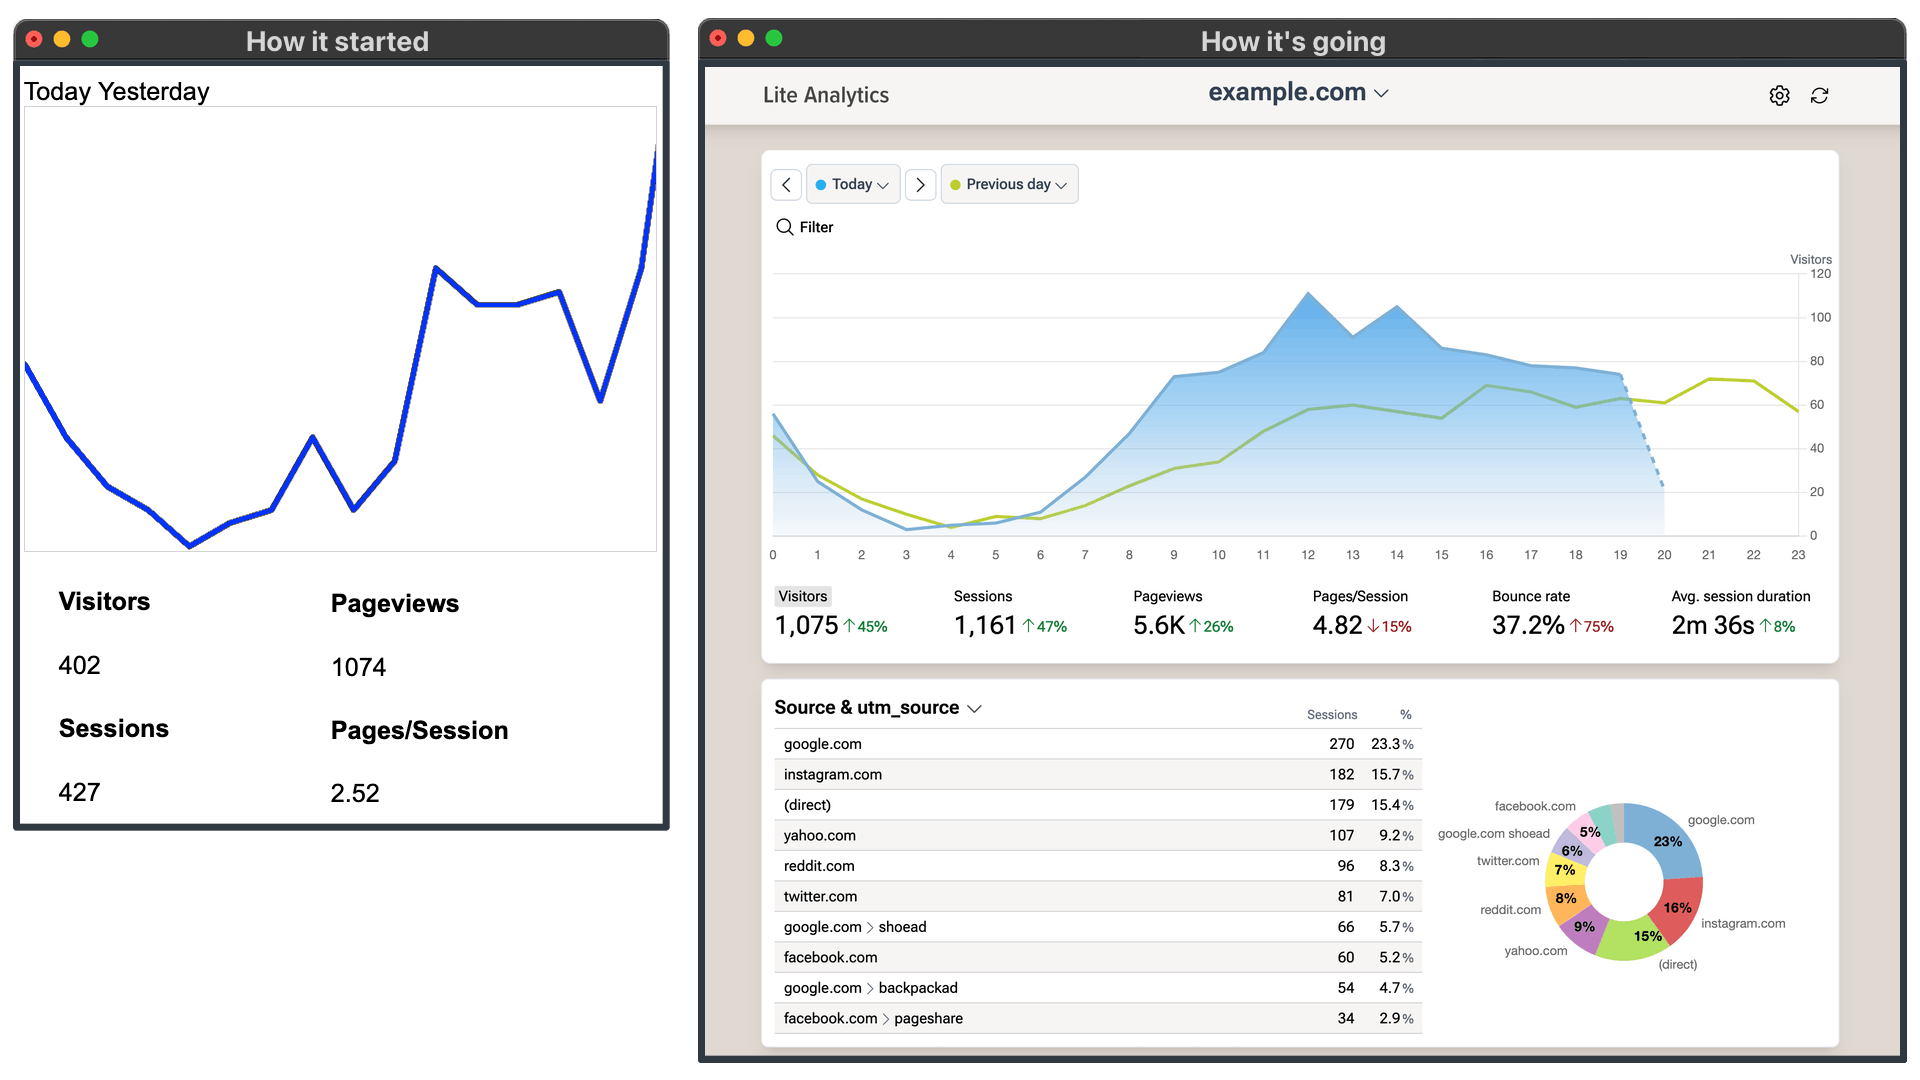 Lite Analytics first mockup and hot it looks today